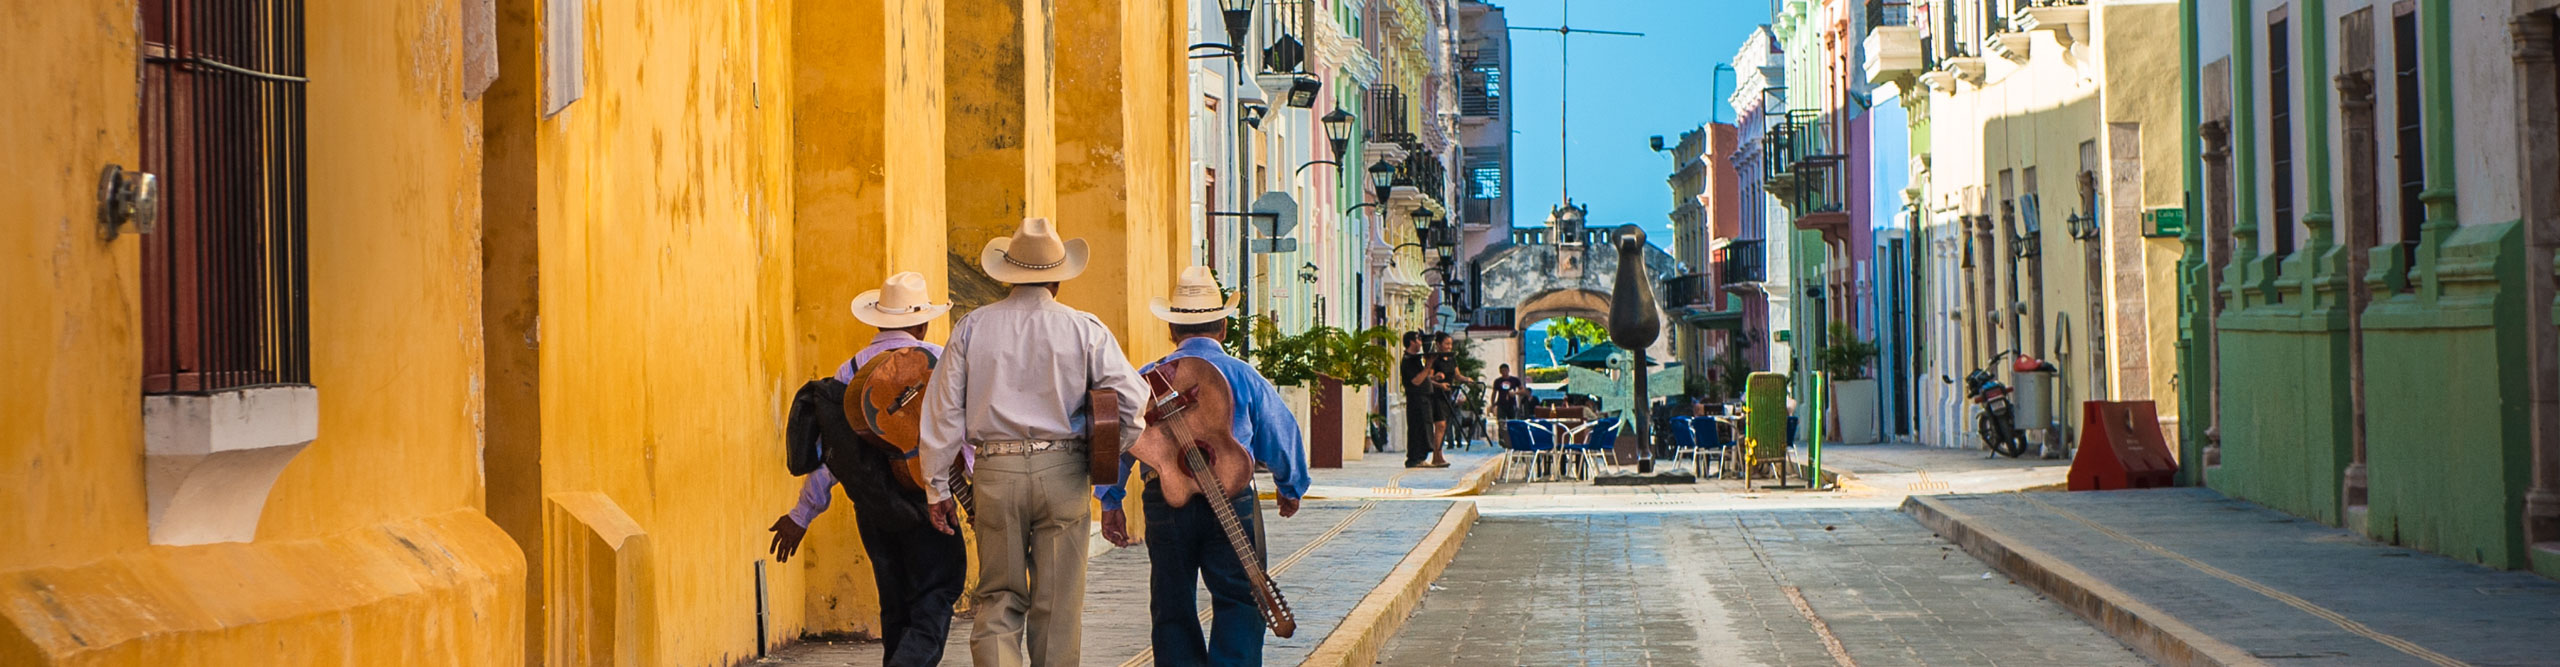 Mariachi band walking on the streets of colonial, with yellow buildings, Campeche city, Mexico